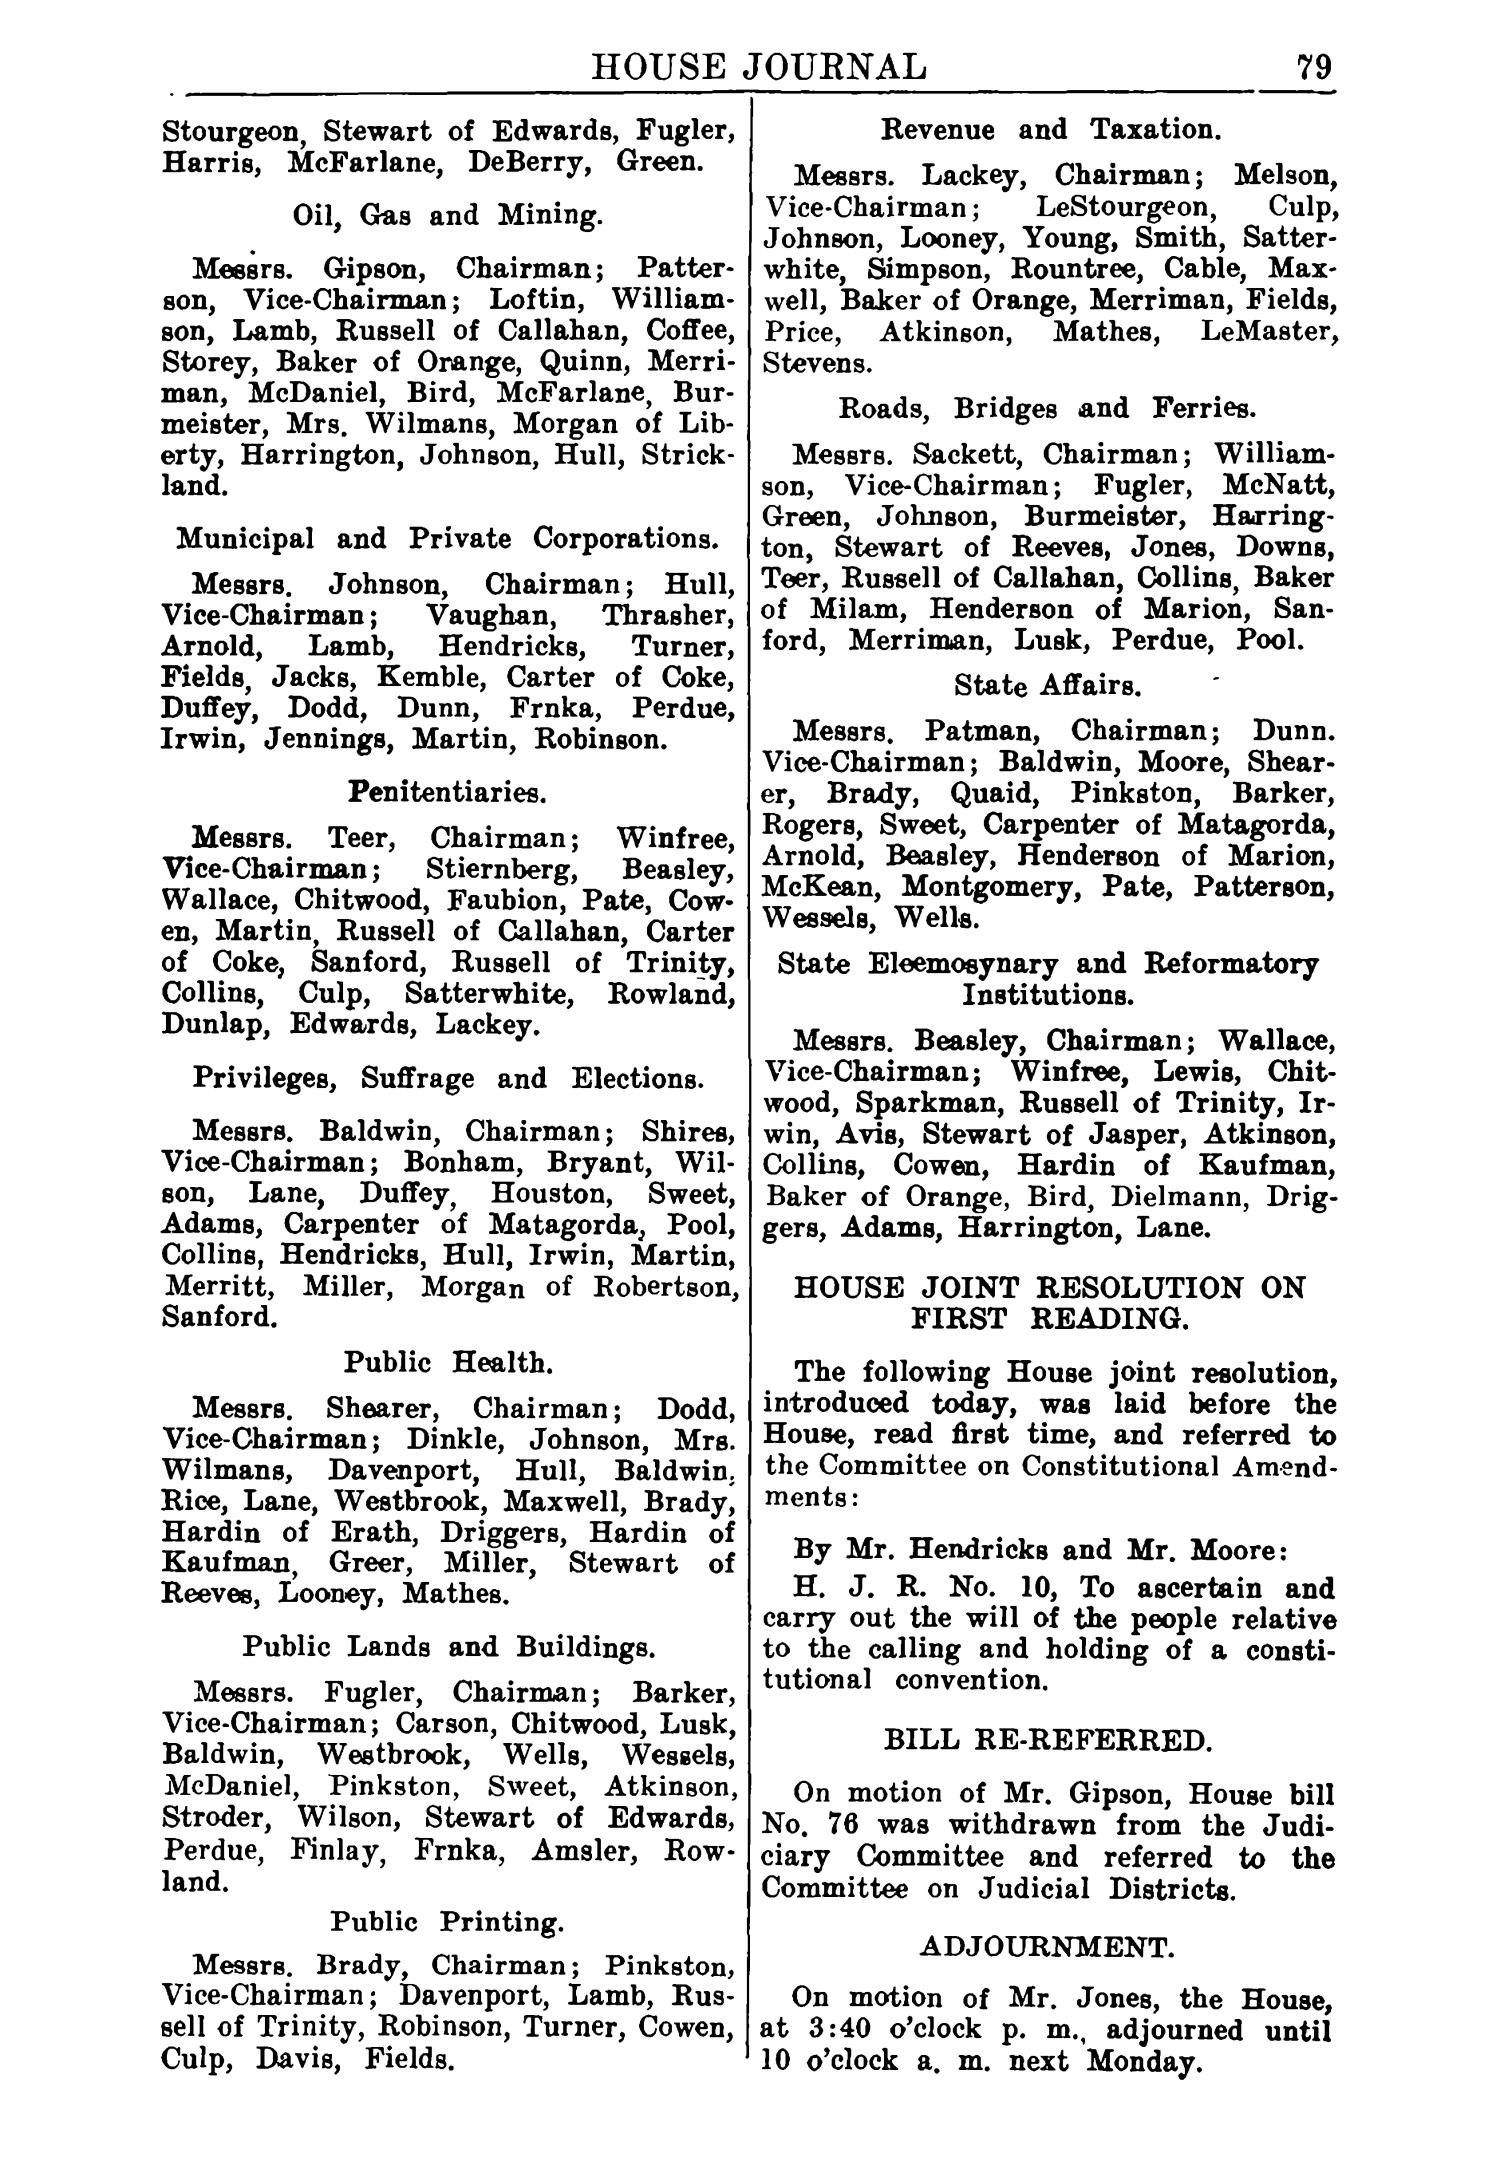 Journal of the House of Representatives of the Regular Session of the Thirty-Eighth Legislature of the State of Texas
                                                
                                                    79
                                                